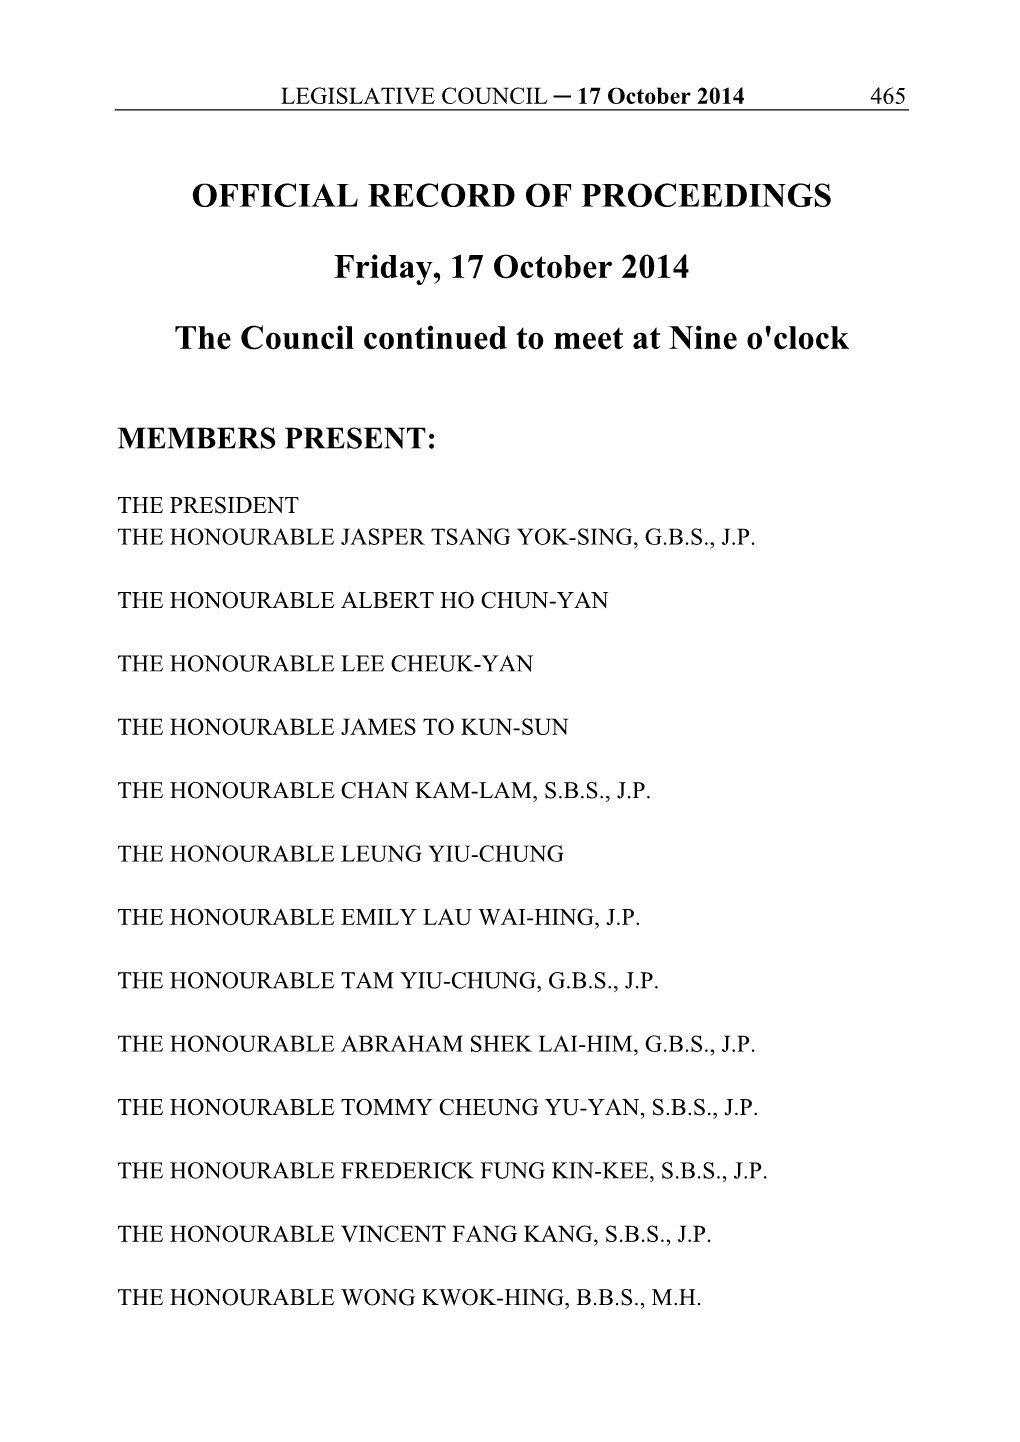 OFFICIAL RECORD of PROCEEDINGS Friday, 17 October